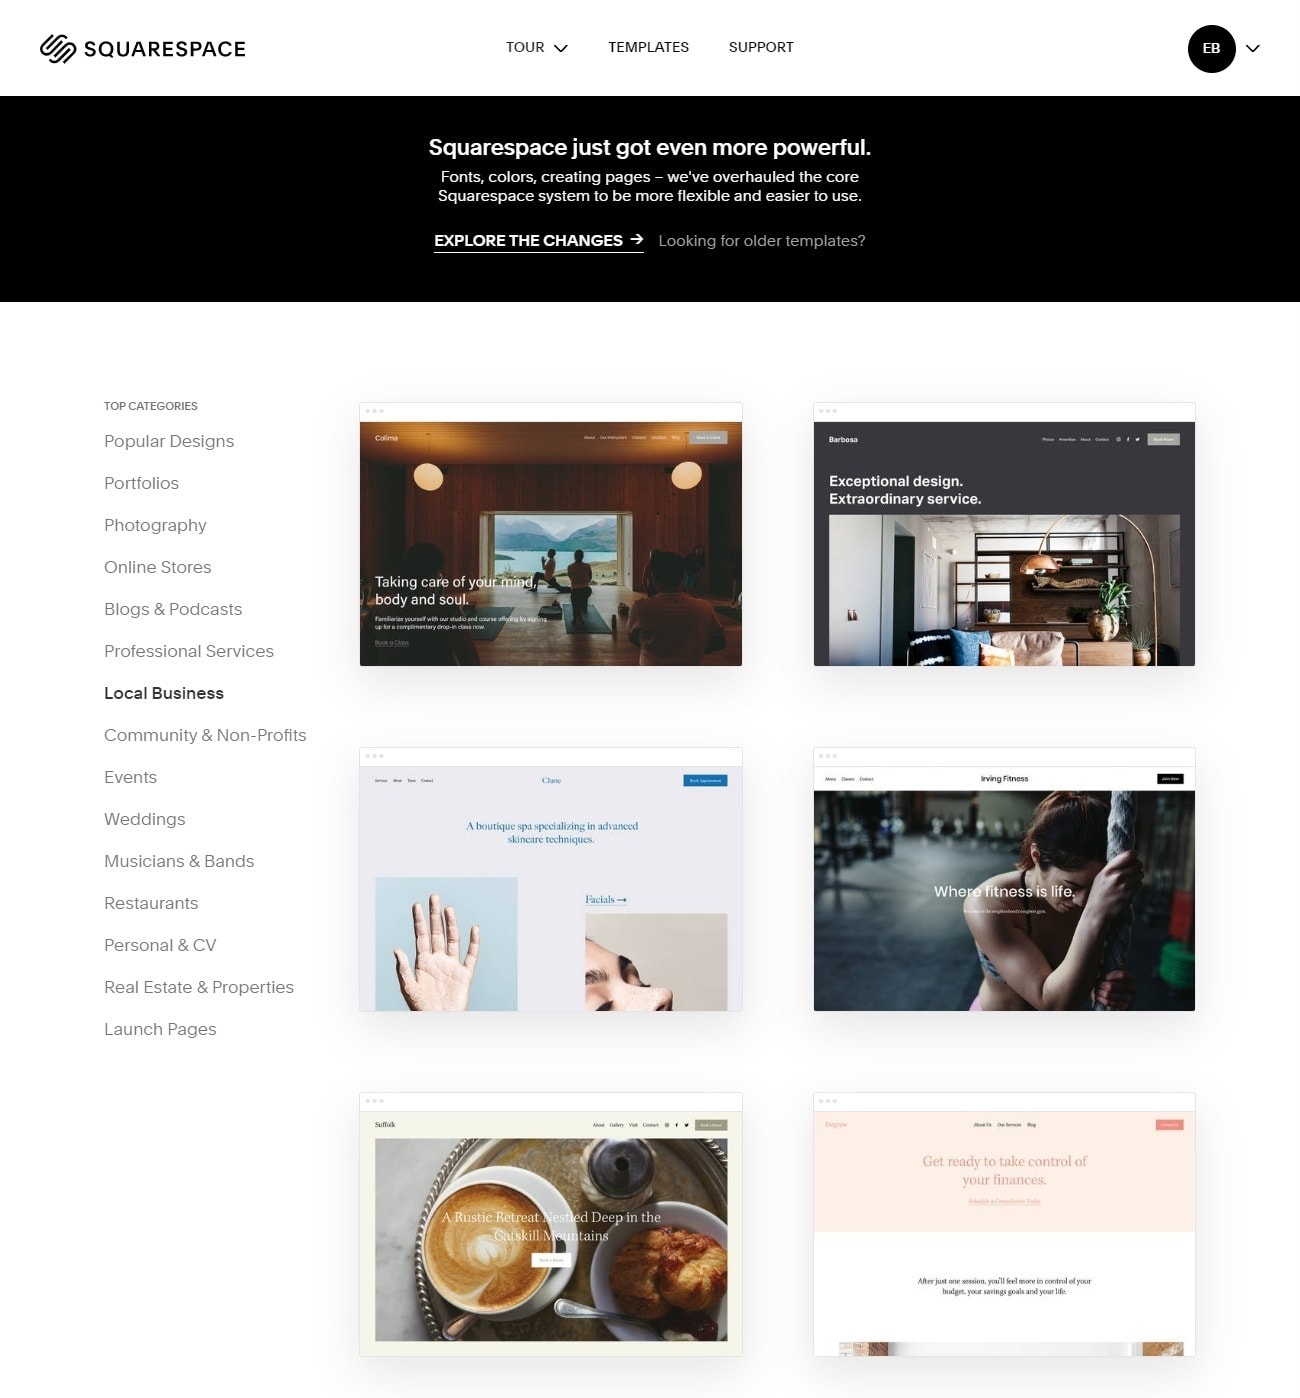 Squarespace Local Business templates